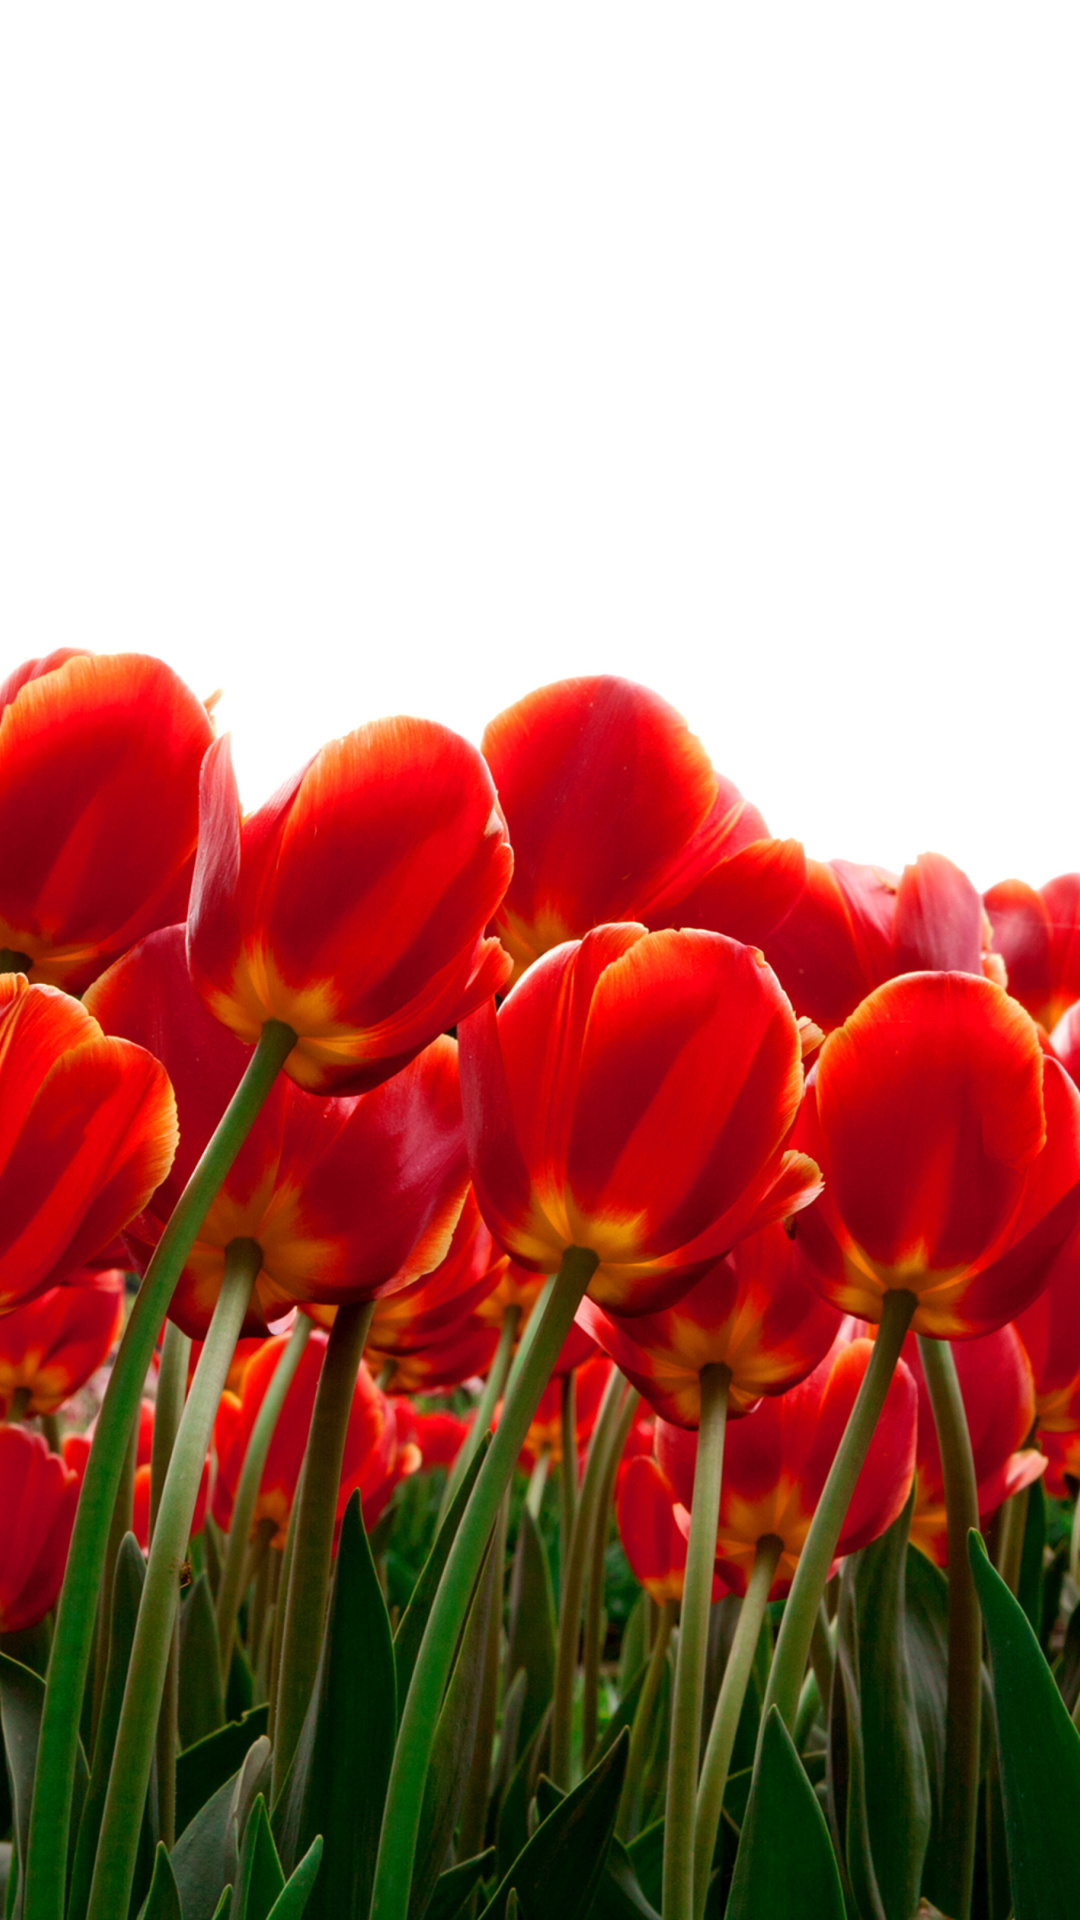 Red Tulips wallpaper 1080x1920